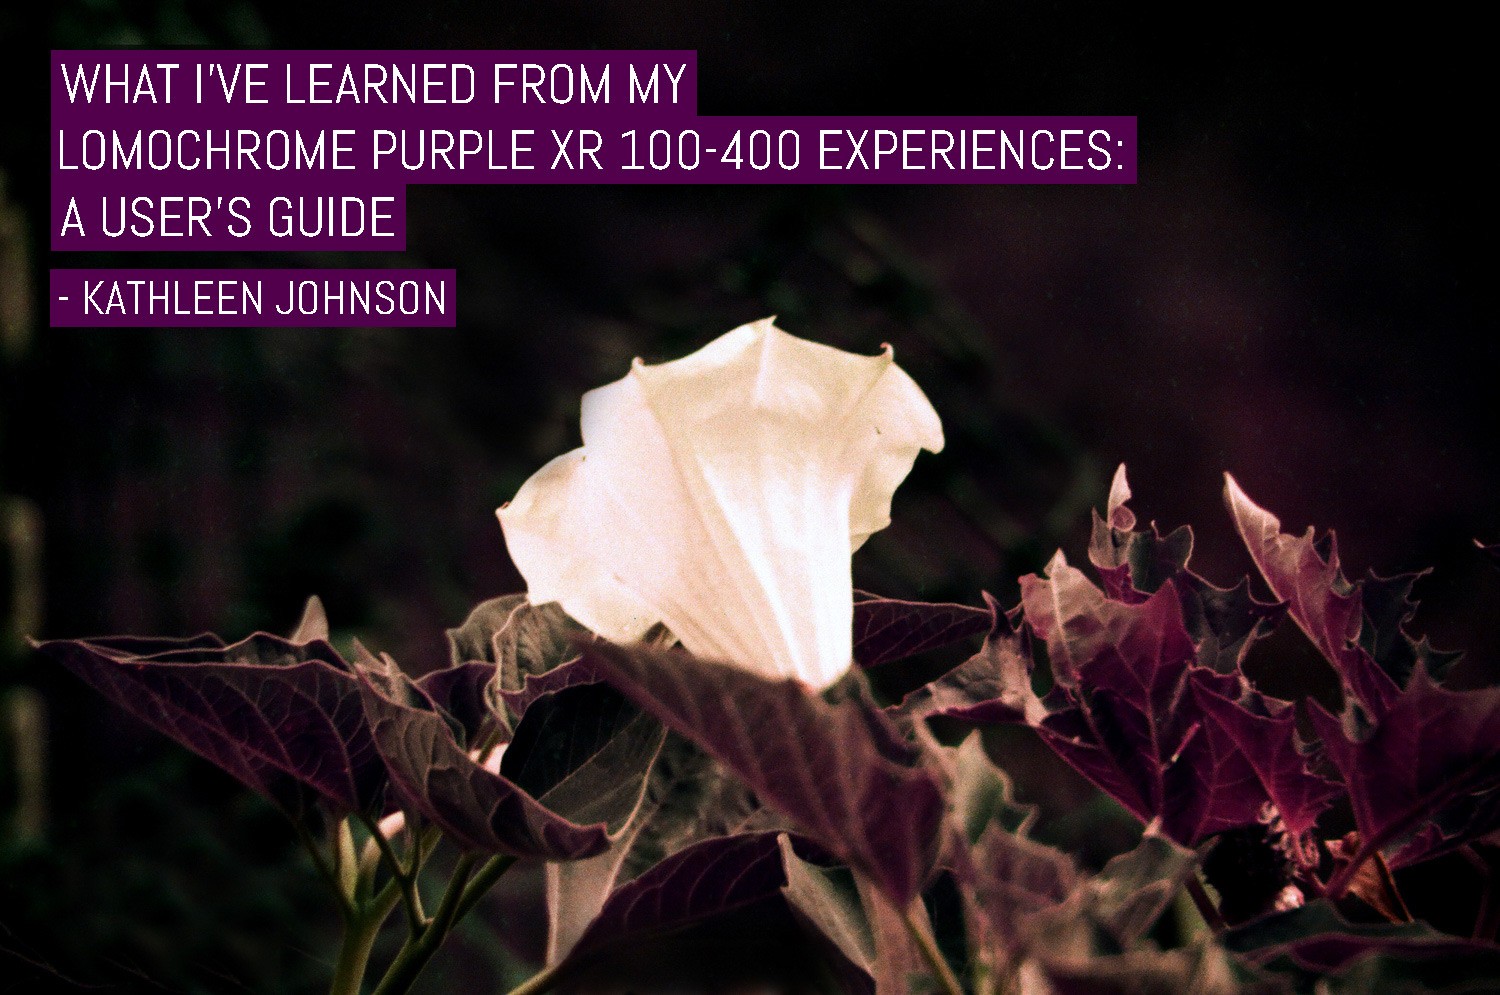 What I’ve learned from my LomoChrome Purple XR 100-400 experiences: A user’s guide